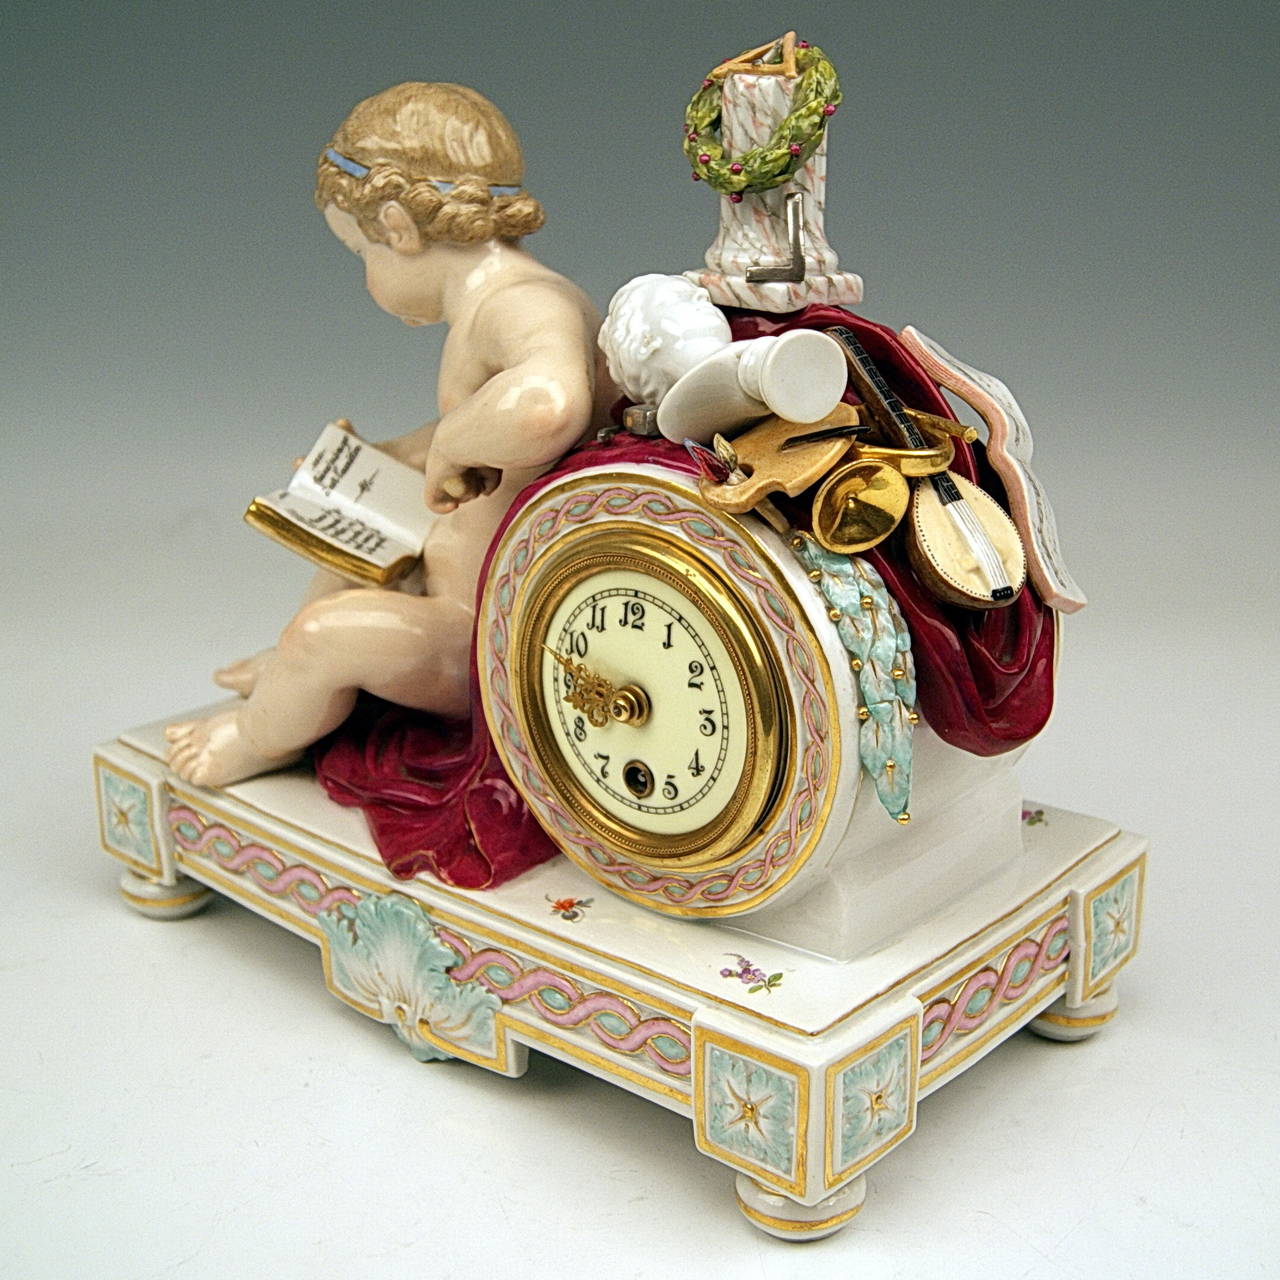 Meissen Gorgeous Mantle Table Clock with Cherub 
 
Manufactory: Meissen
Hallmarked:  Blue Meissen Sword Mark with Pommels on Hilts  (underglazed)
MODEL NUMBER  D 78   /   FORMER'S NUMBER  163-88  /  PAINTER'S NUMBER  17
FIRST QUALITY  
Dating: